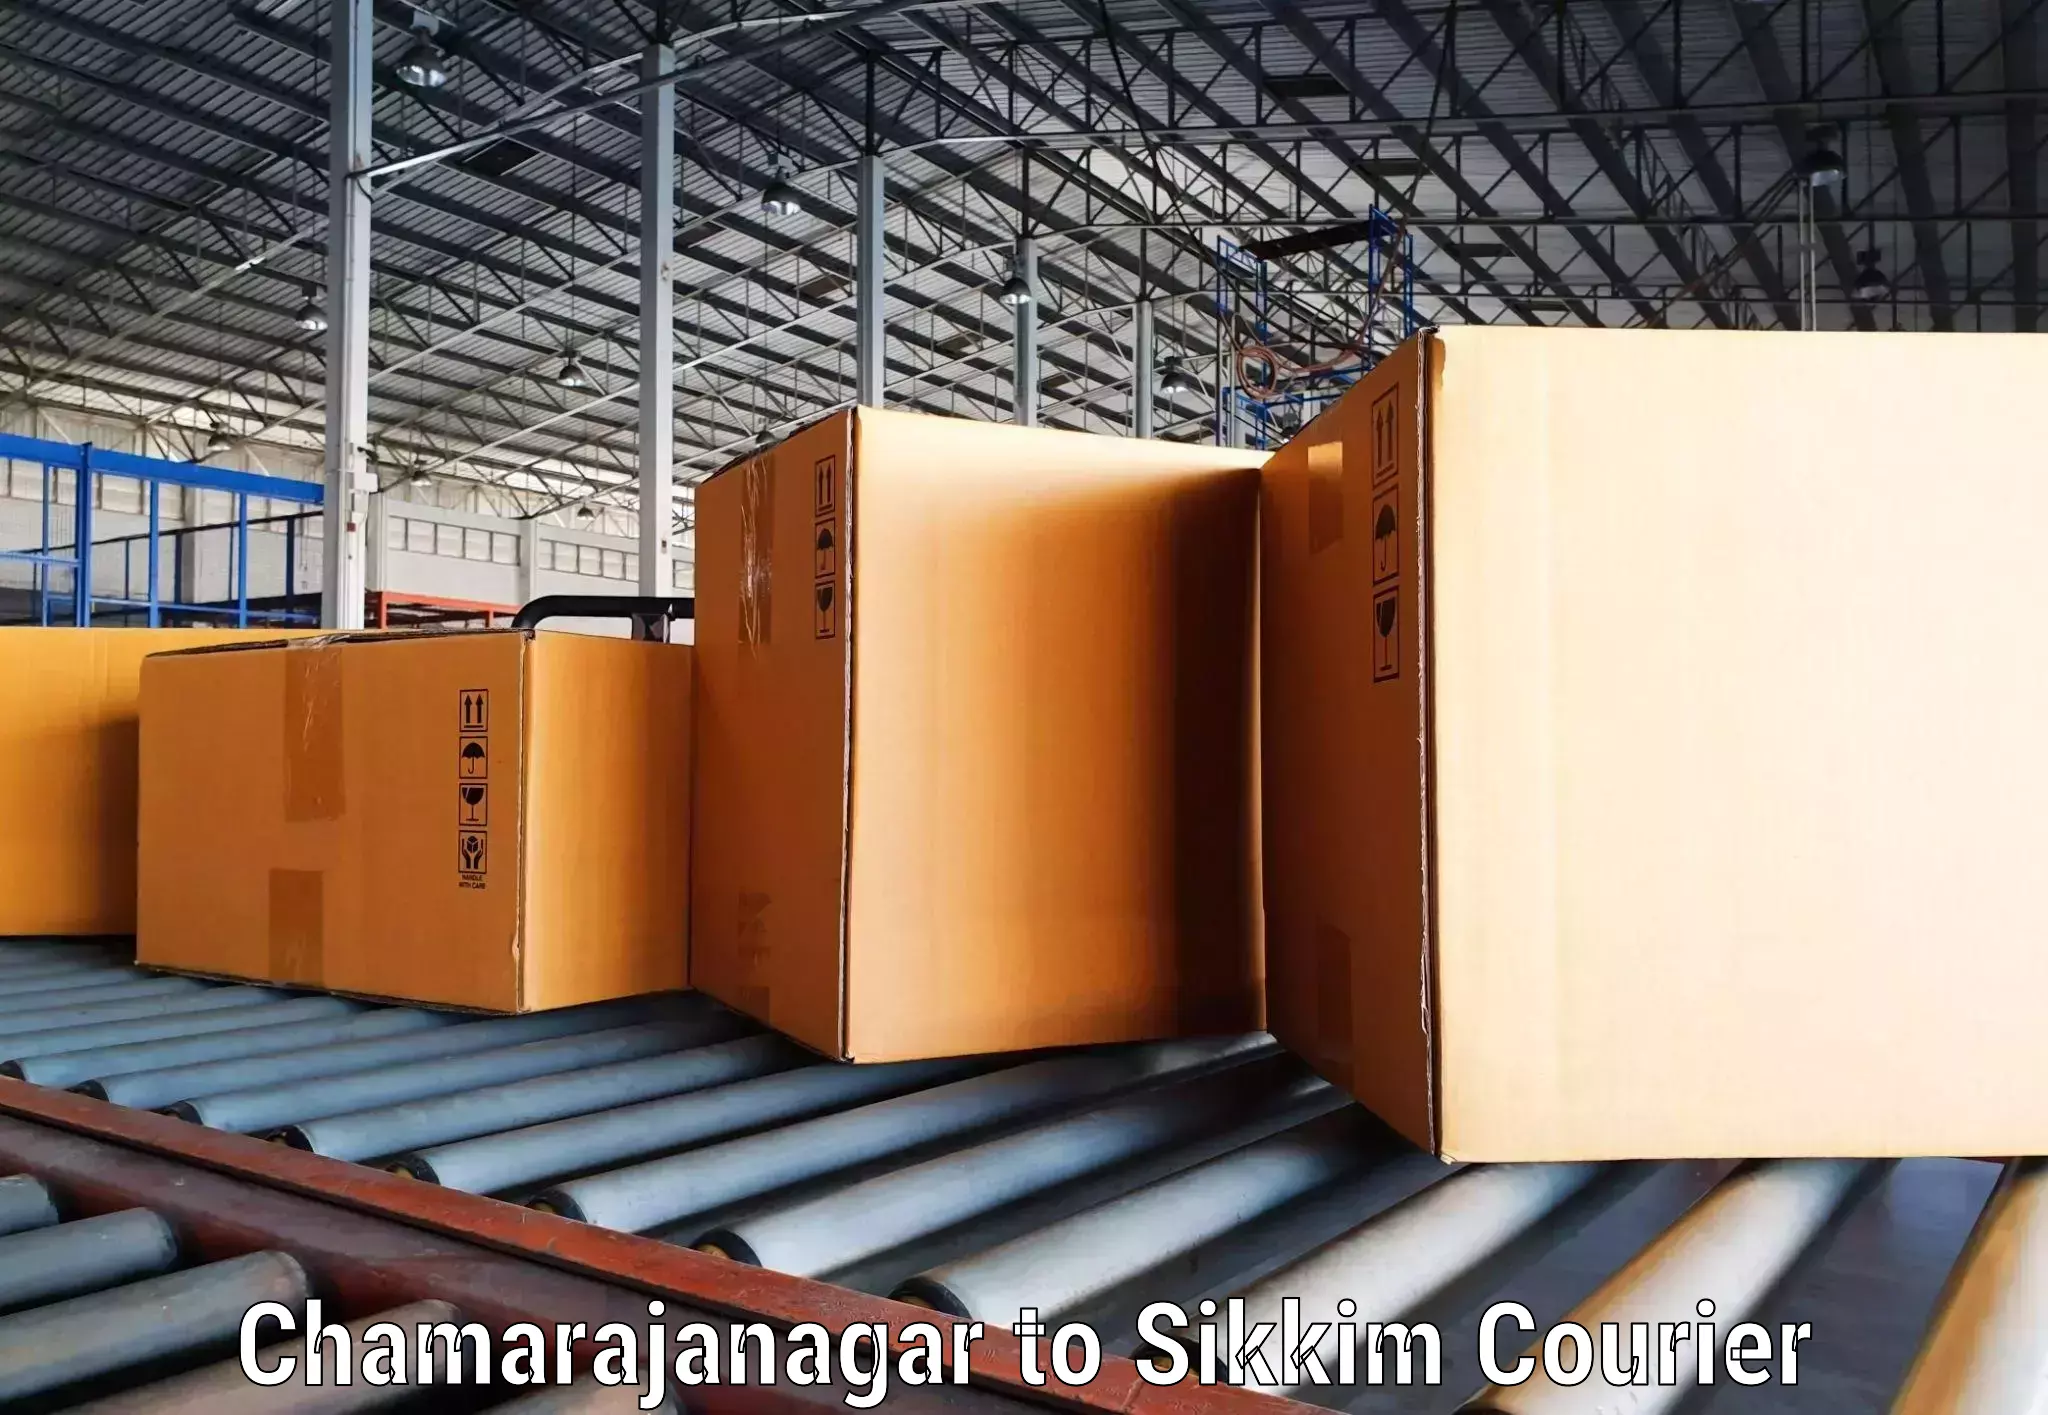 State-of-the-art courier technology Chamarajanagar to East Sikkim